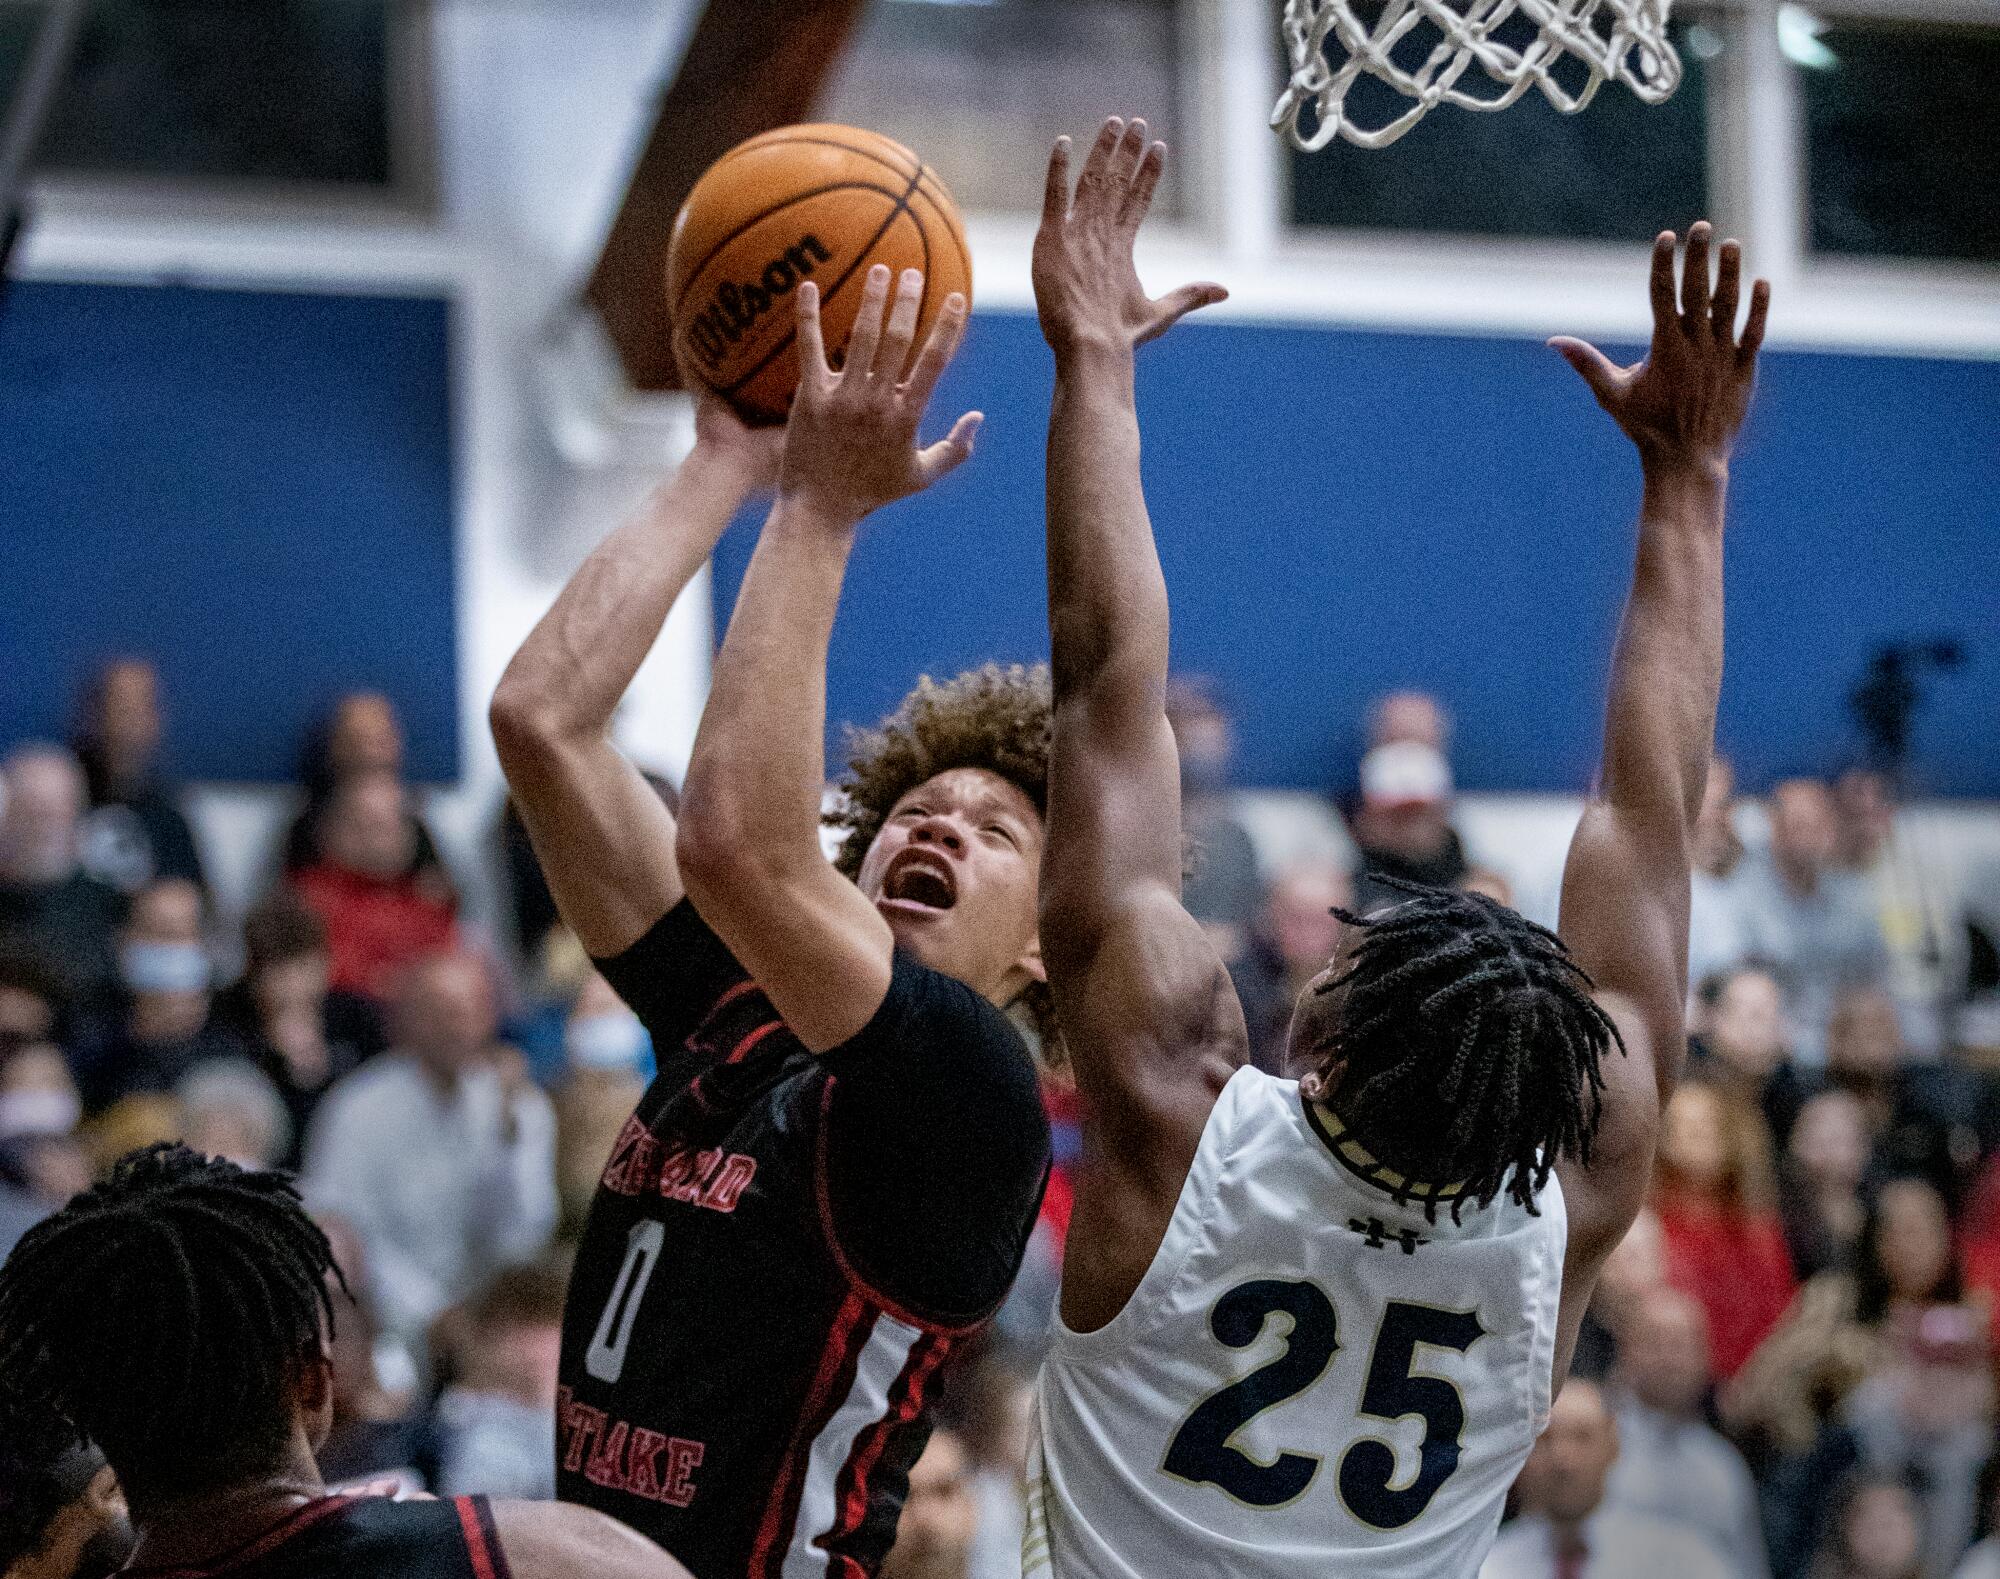 Harvard-Westlake star point guard Trent Perry, left, puts up a shot during a game.